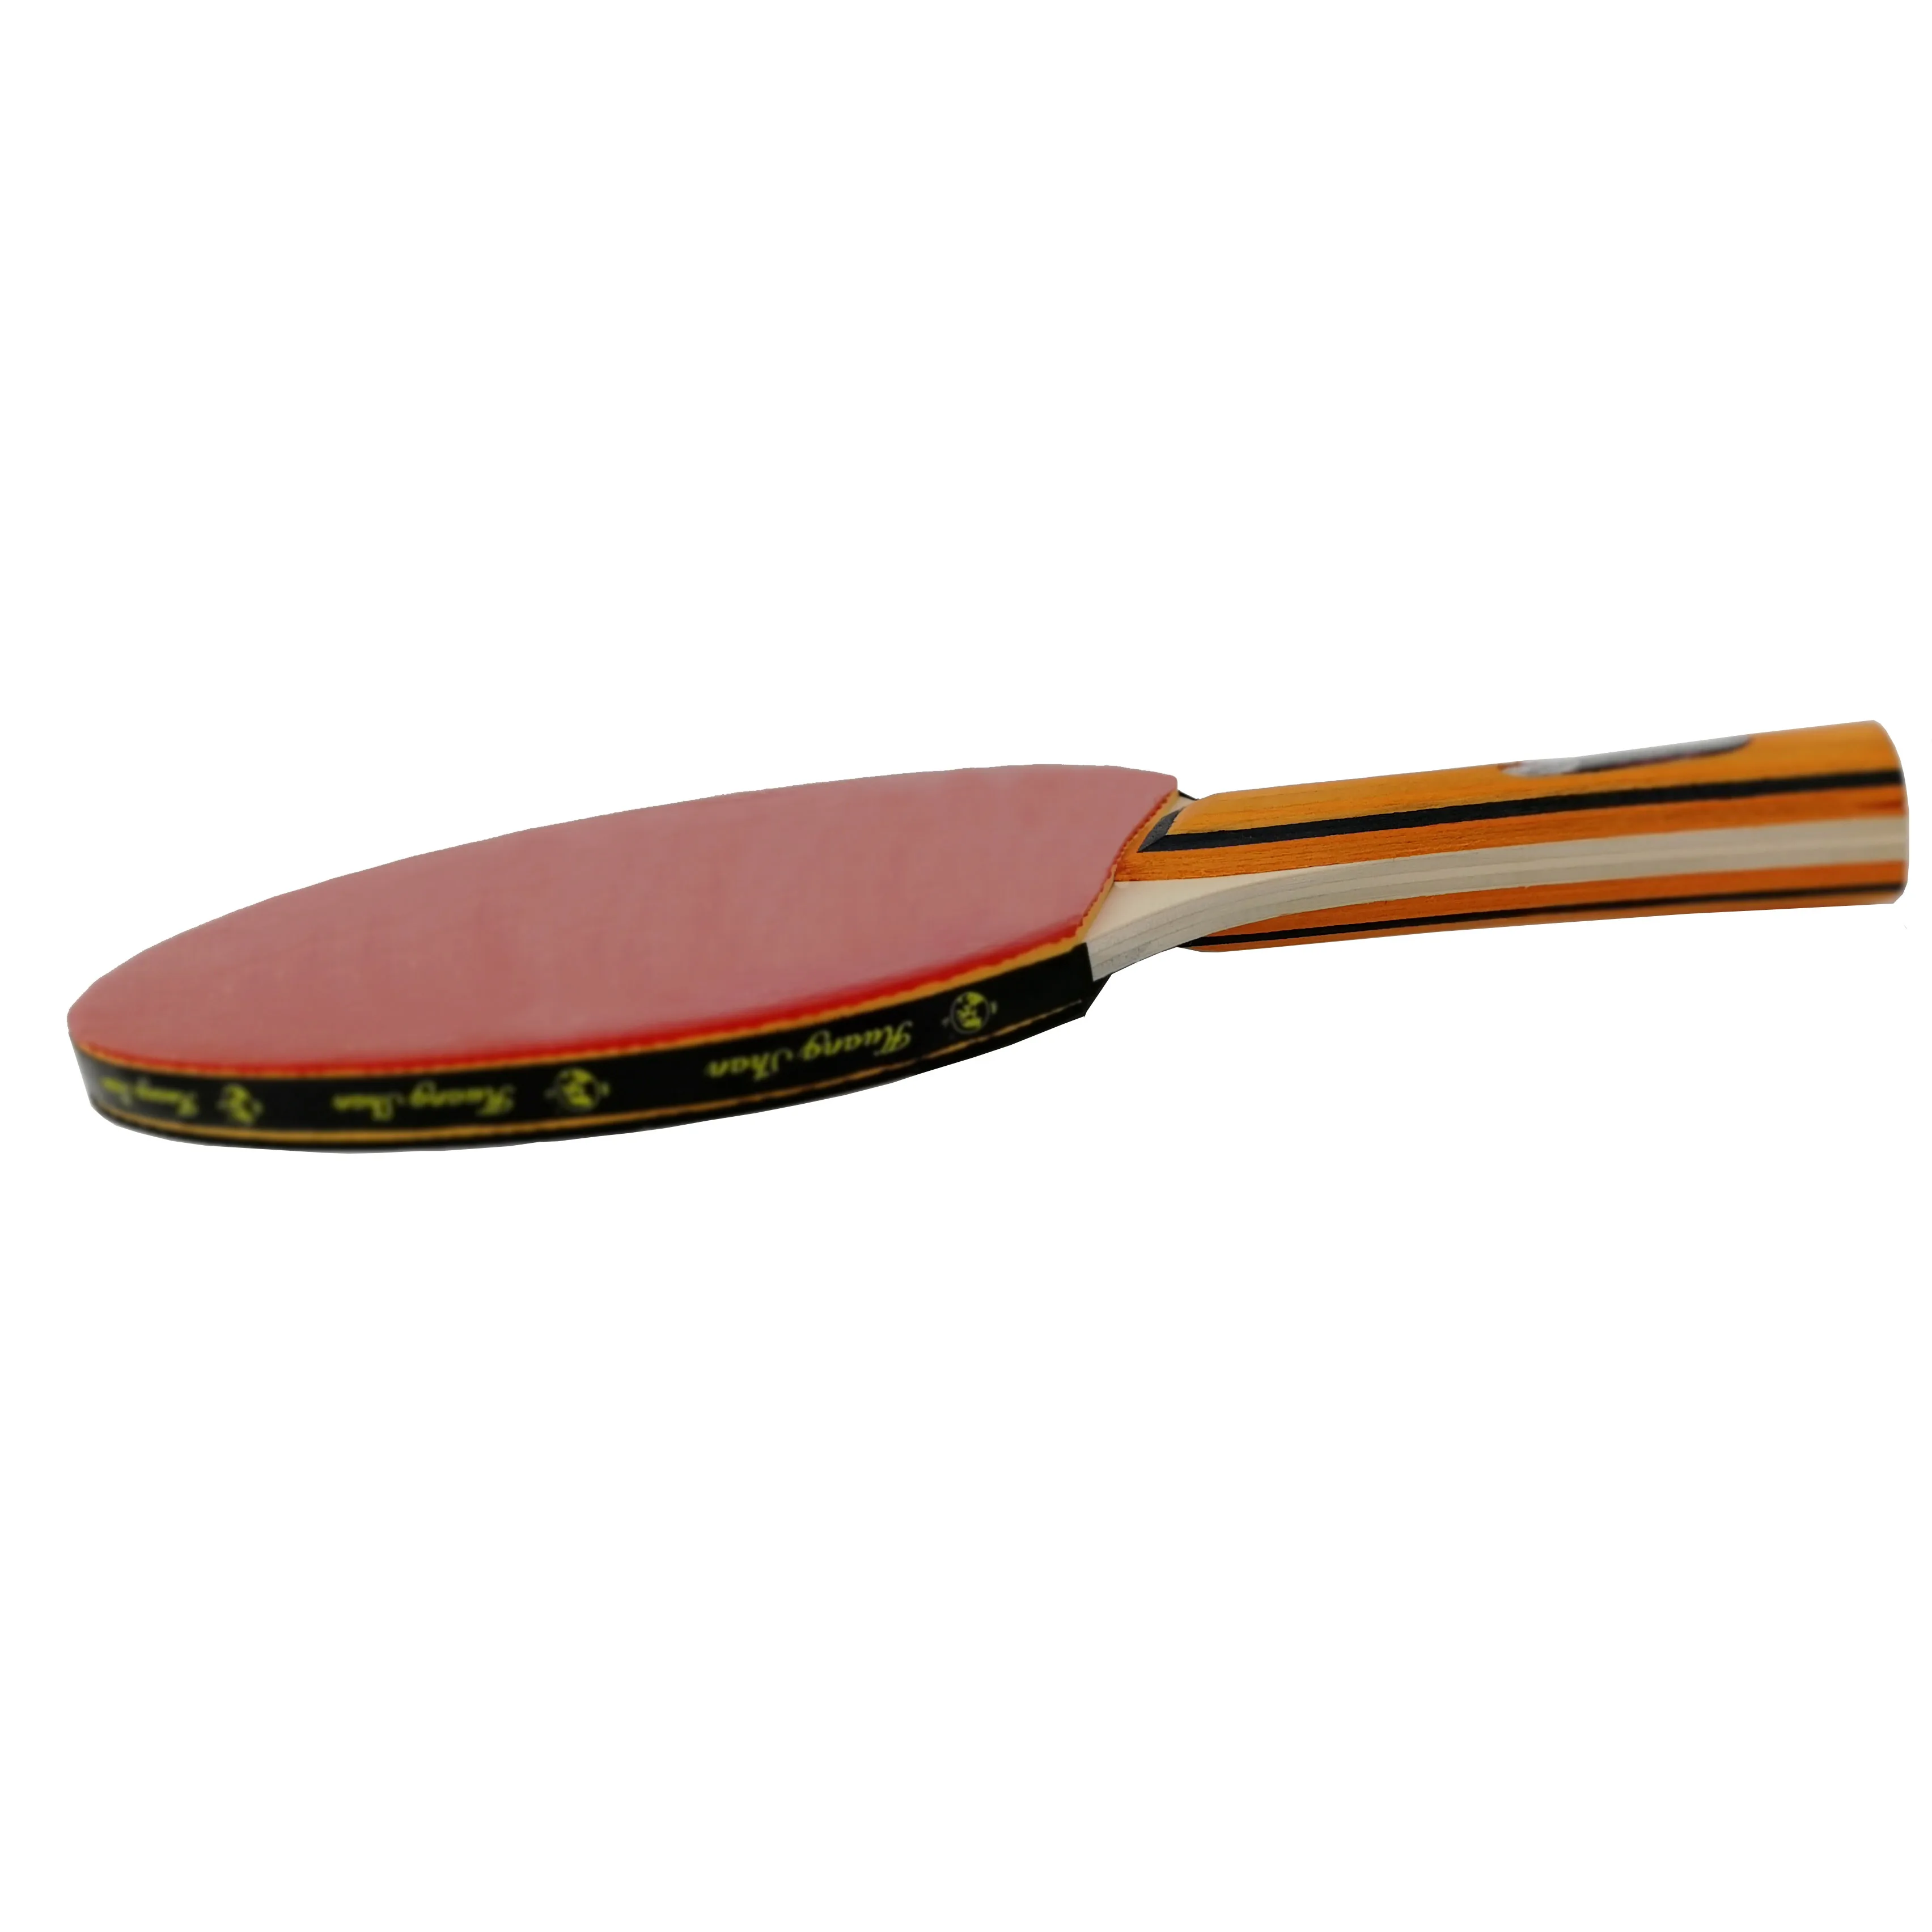 Ittf Approve 4 Star Table Tennis Paddle Pingpong Racket With 5 Plyer Wood Paddle  Blade - Buy Table Tennis Paddle,Table Tennis Racket,Pingpong Racket Product  on Alibaba.com